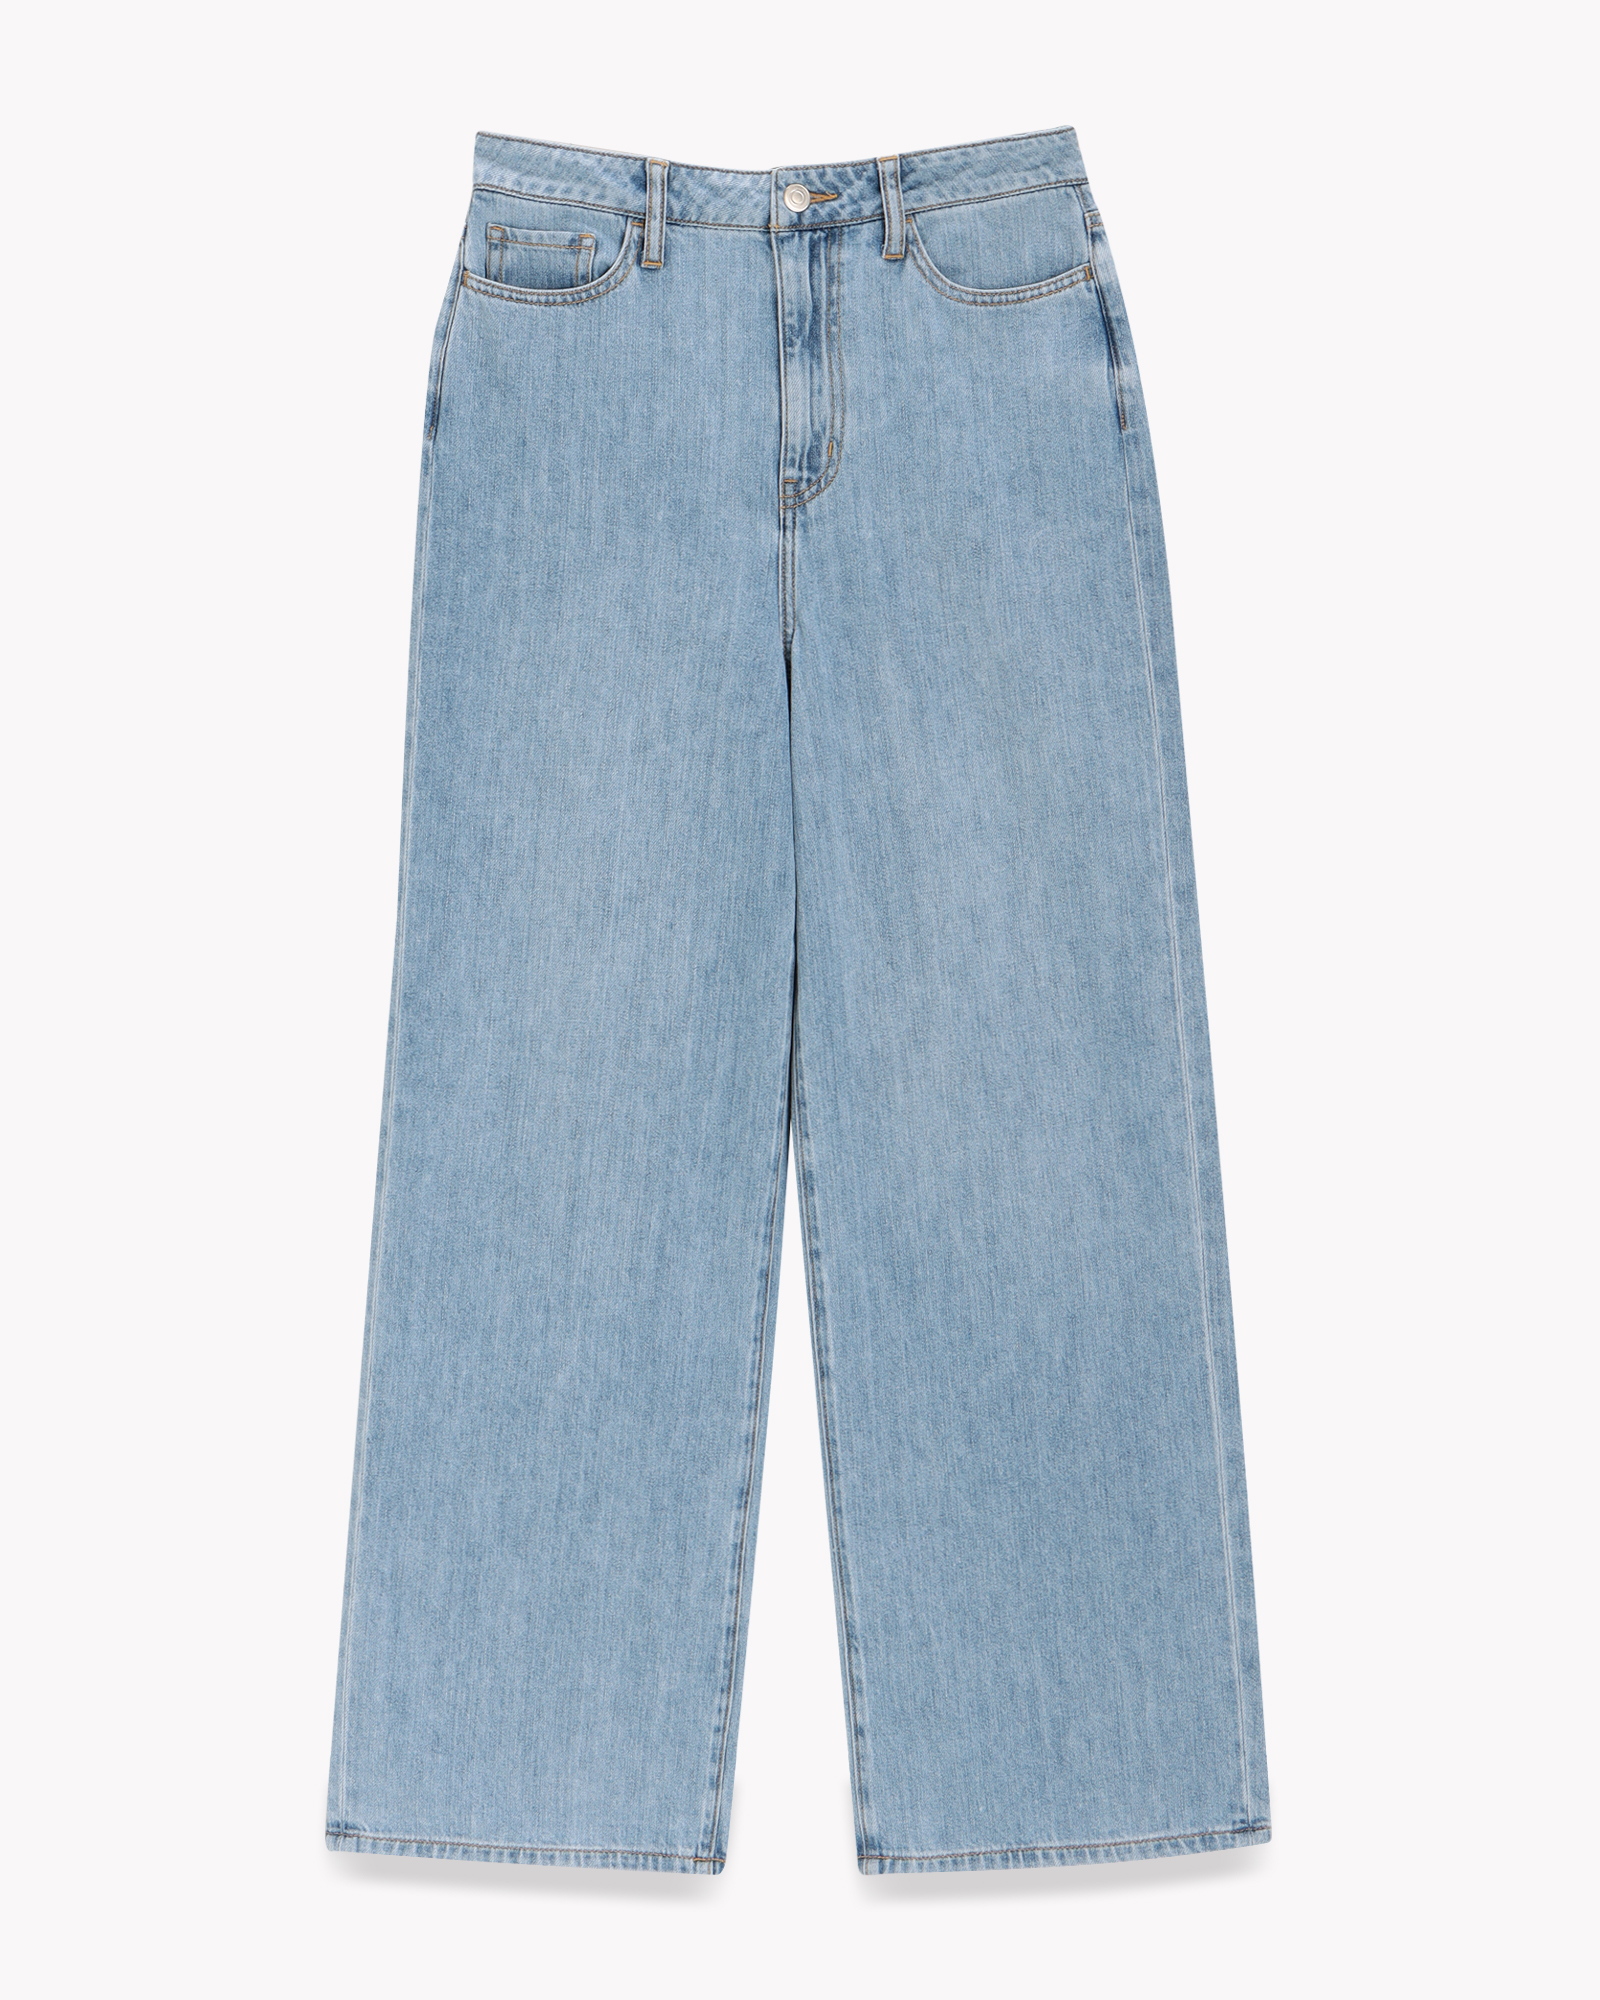 Washed10 Banny D | Theory luxe[セオリーリュクス]公式通販サイト